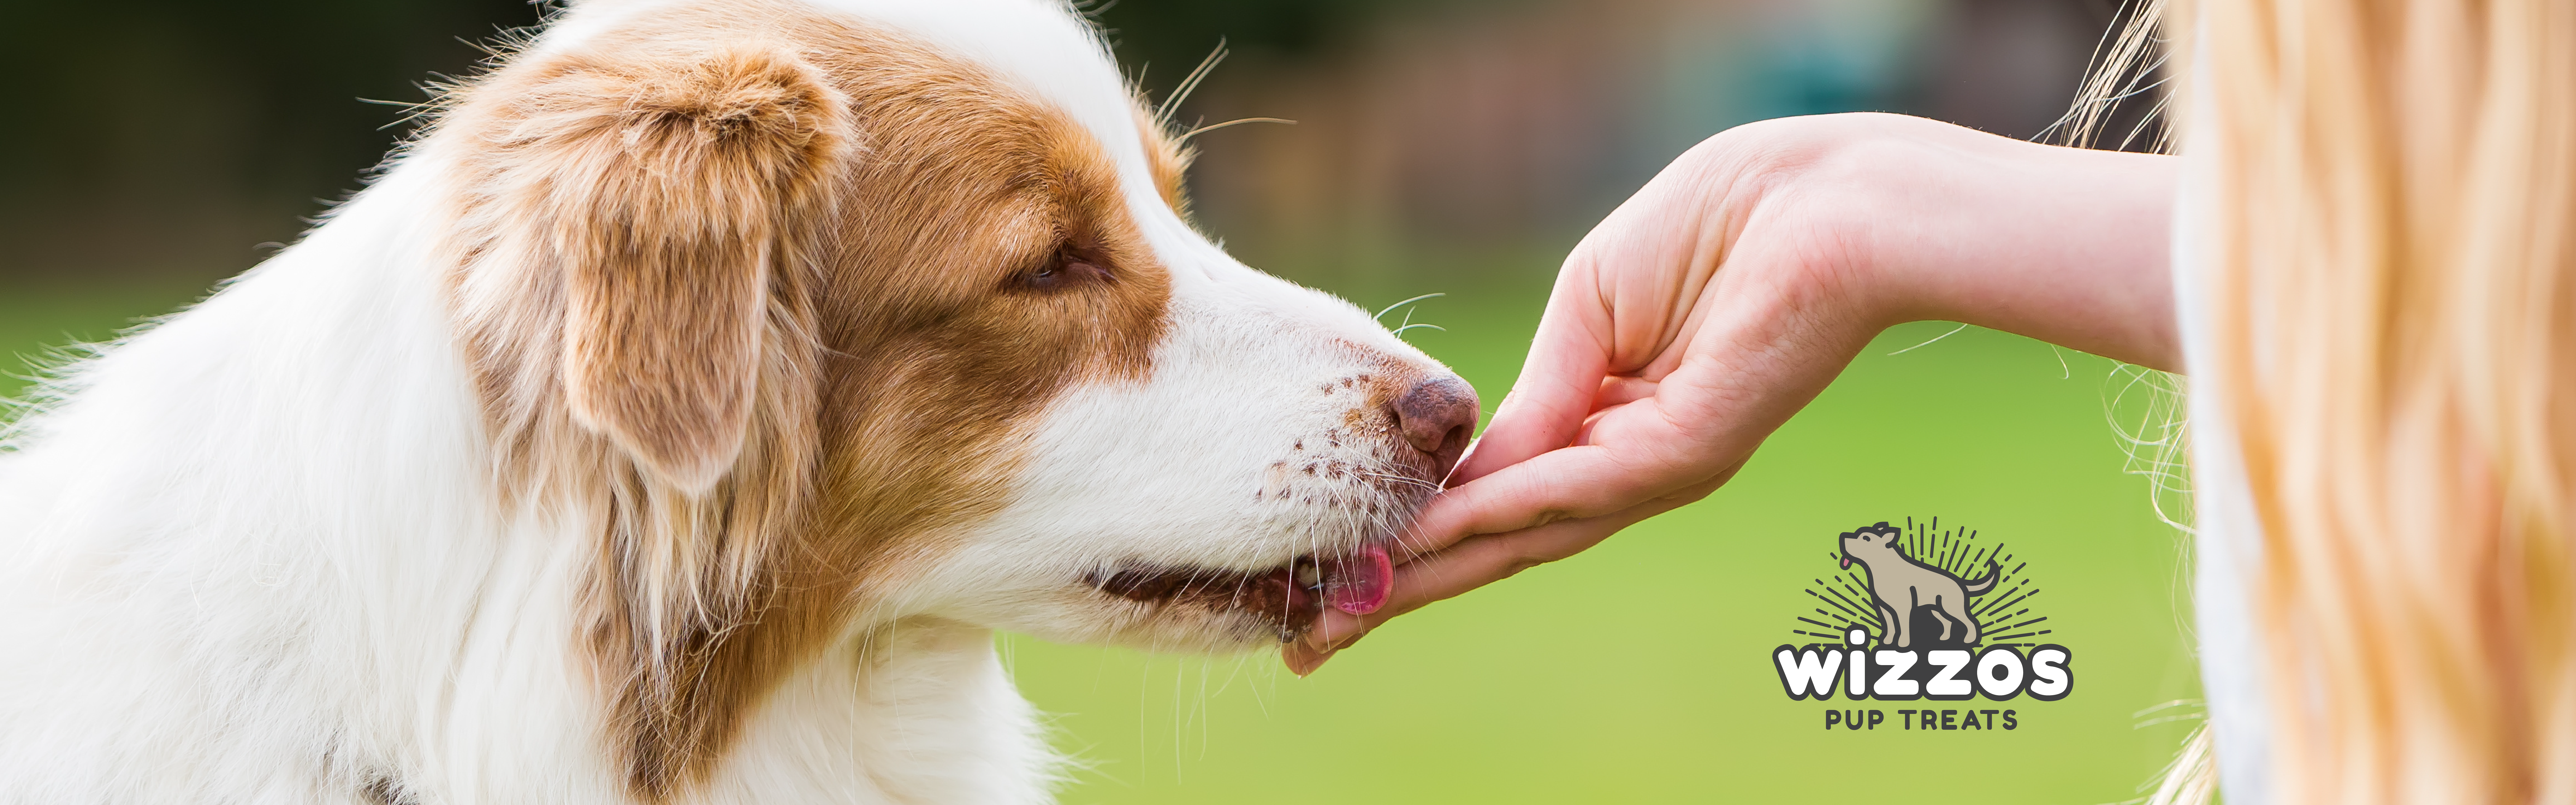 A brown and white dog gently takes a treat from a person's hand, with a logo for "Wizzos Pup Treats" overlayed on the right side of the image.